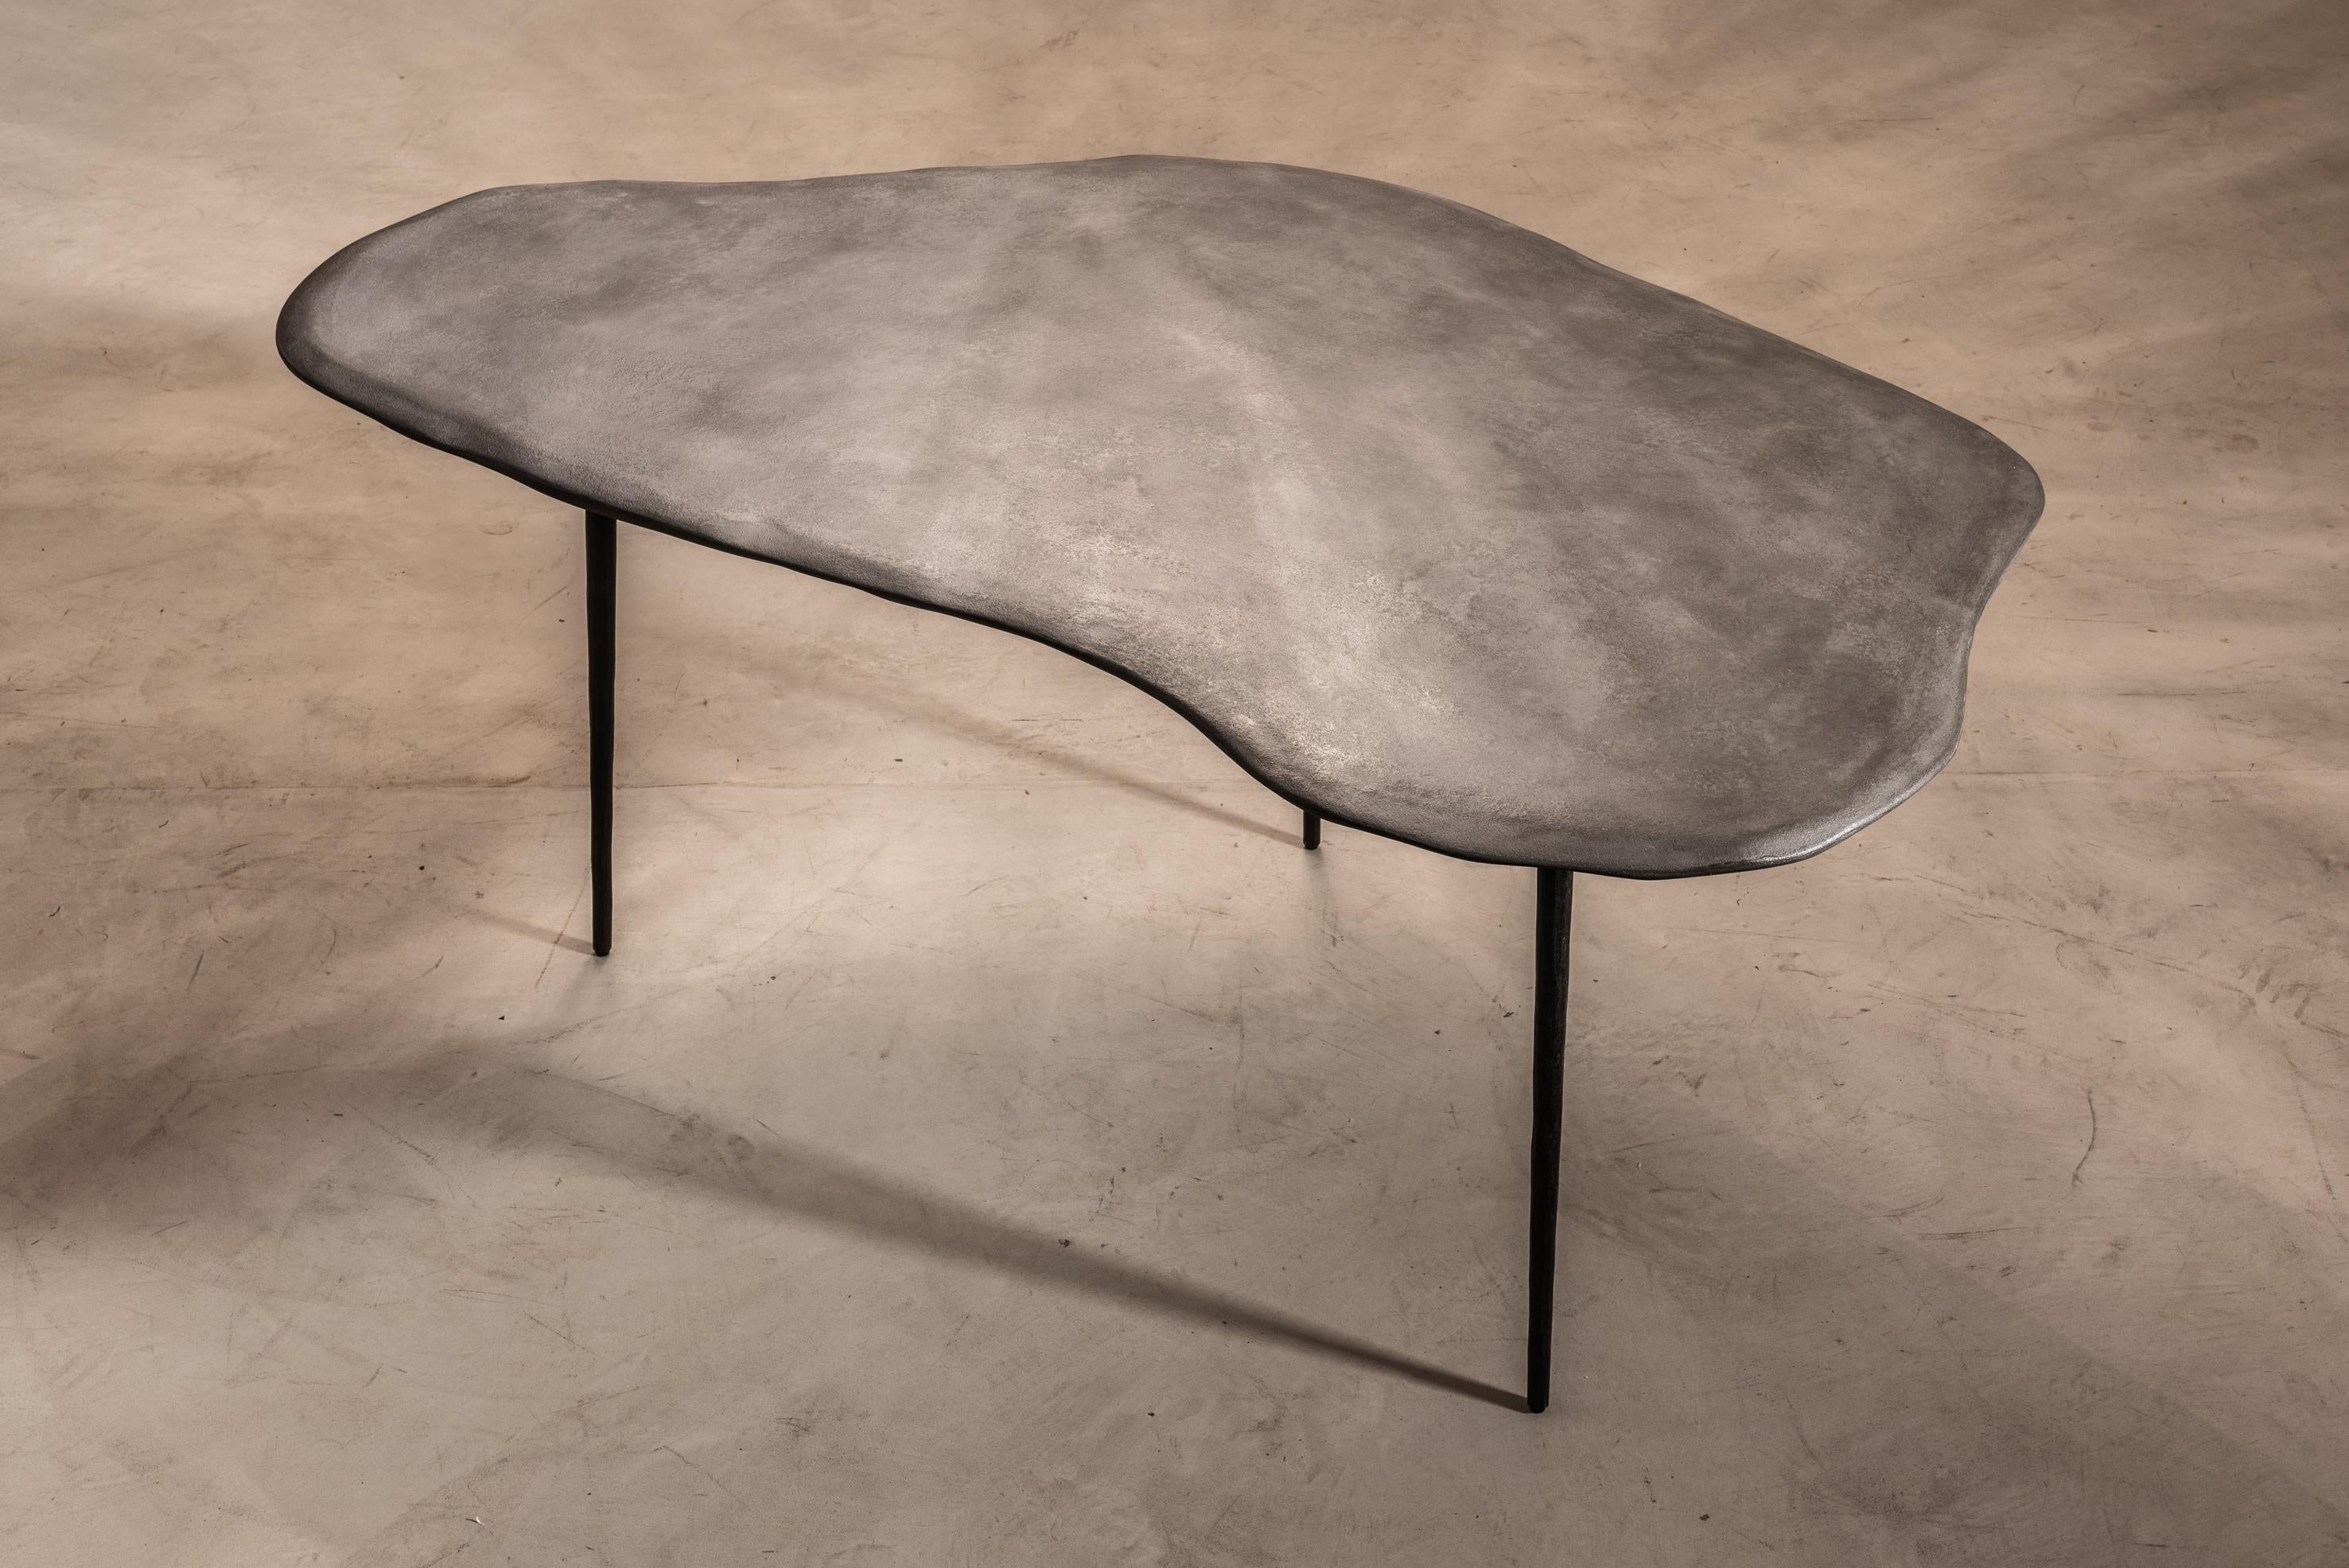 Varenna table C by Studio Emblématique.
Dimensions: W 157 x D 92 x H 76 cm.
Materials: Stonegrain tabletop with conical metal hammered legs.

Pushing the boundaries, going the extra mile to find the extraordinary piece that defines the space.